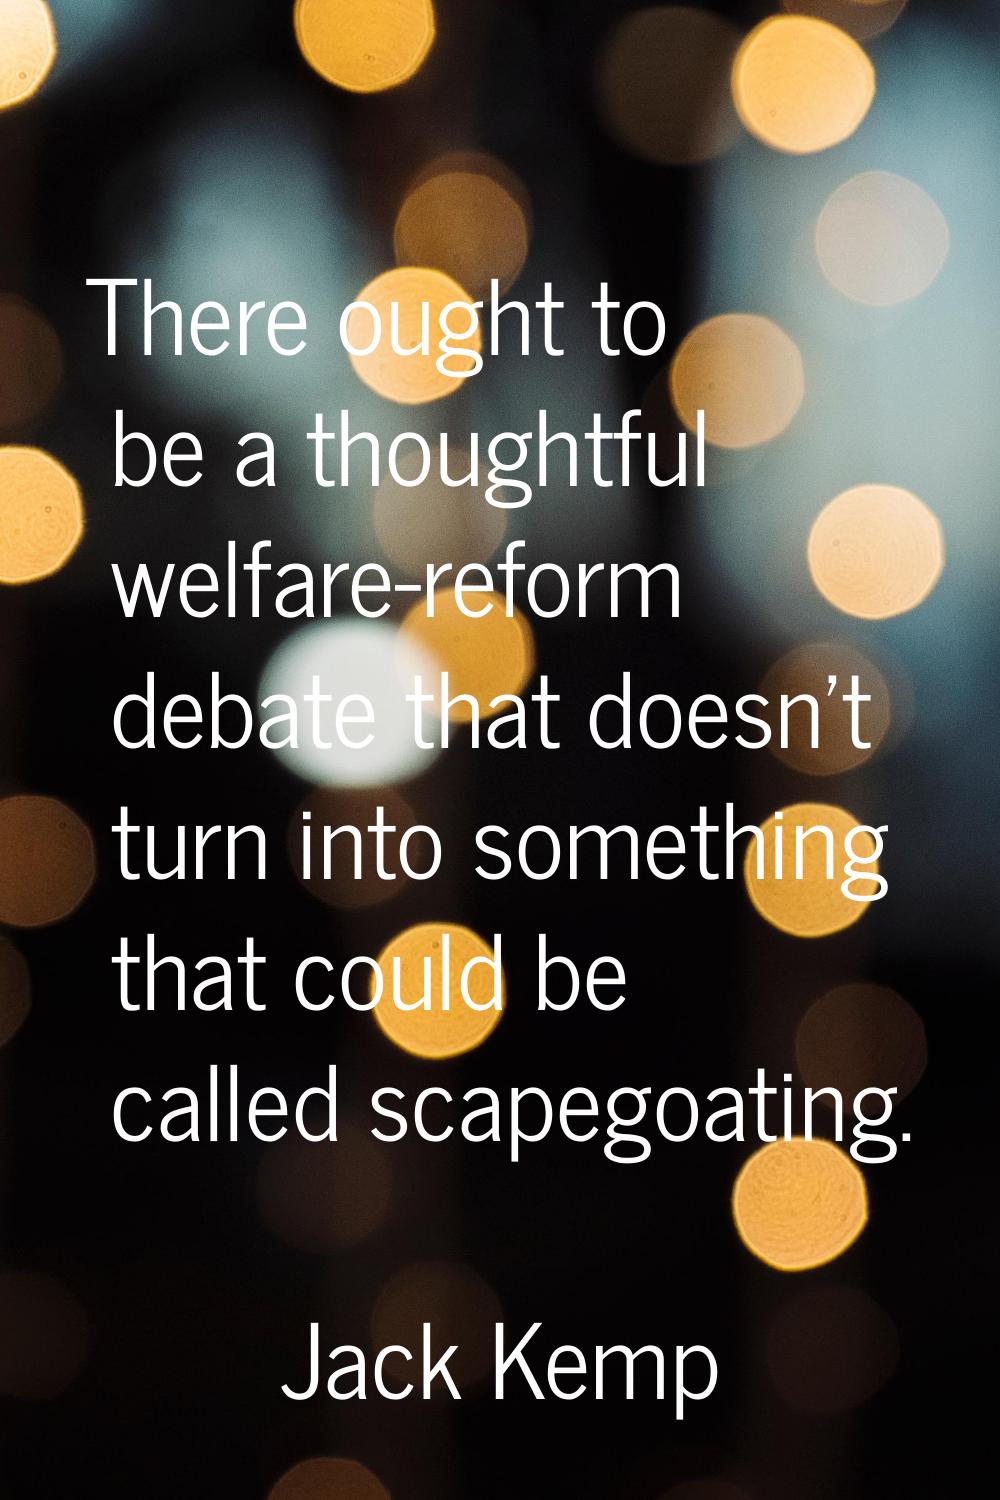 There ought to be a thoughtful welfare-reform debate that doesn't turn into something that could be